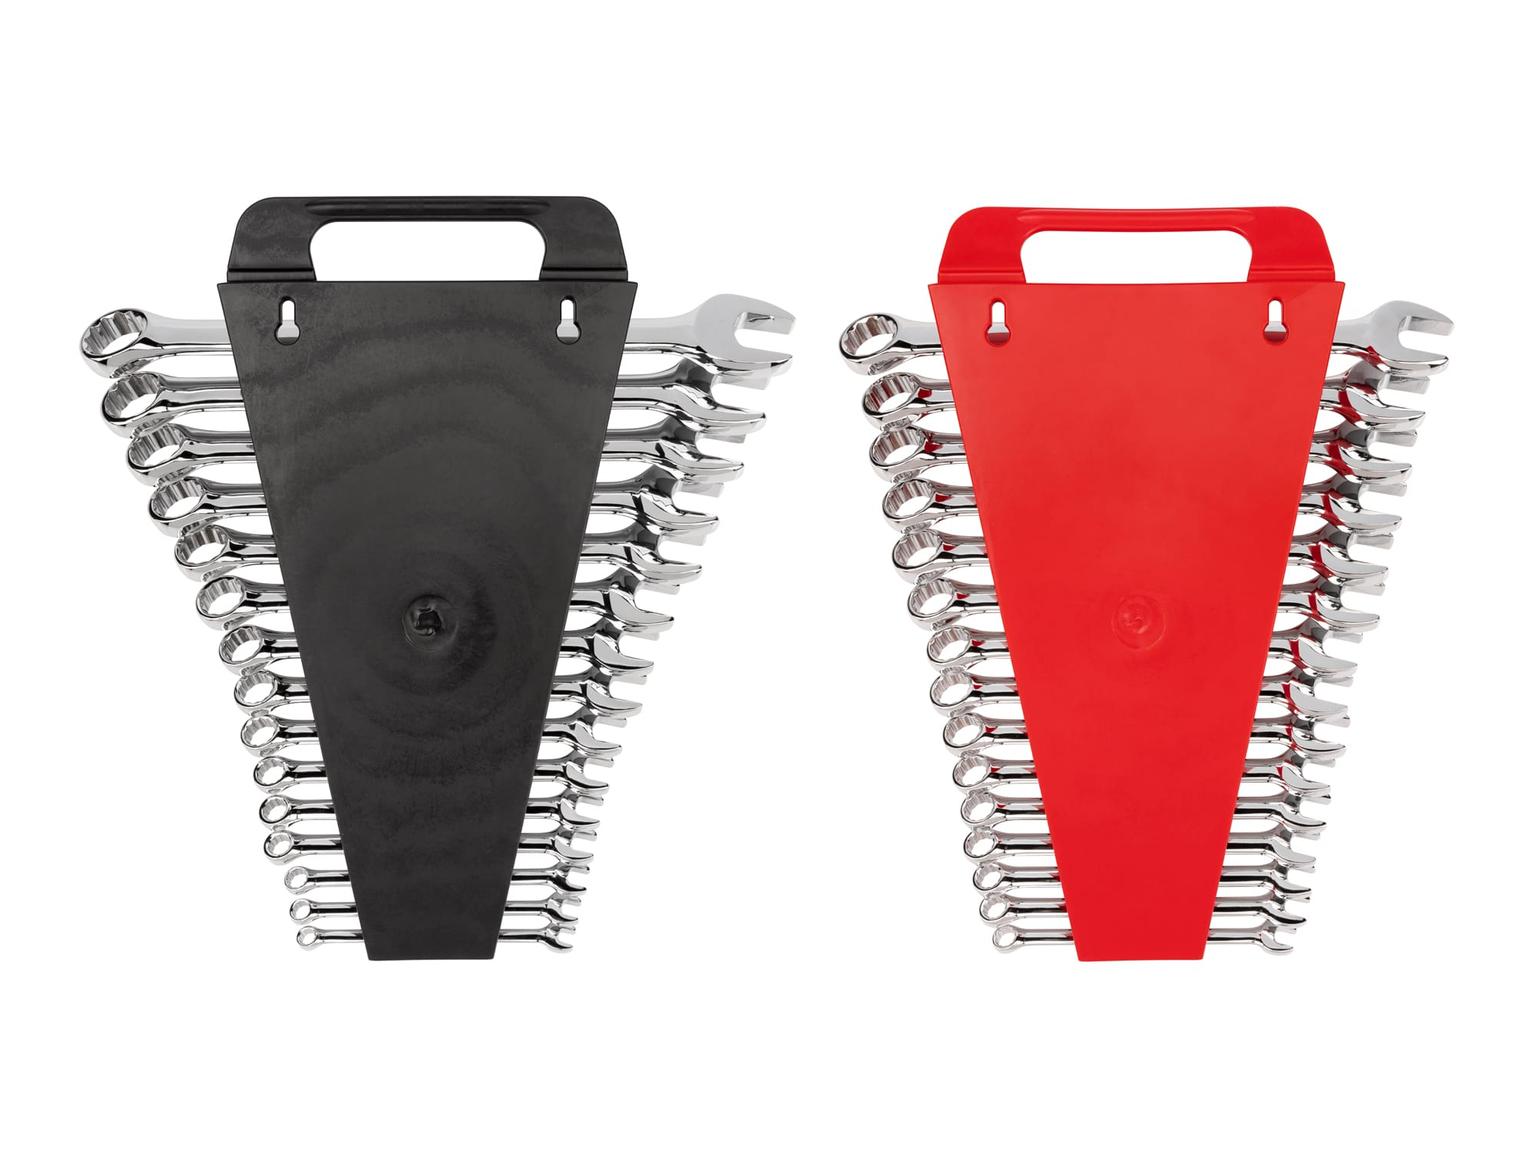 TEKTON 90191-T Combination Wrench Set with Holder, 30-Piece (1/4 - 1 in., 8 - 22 mm)